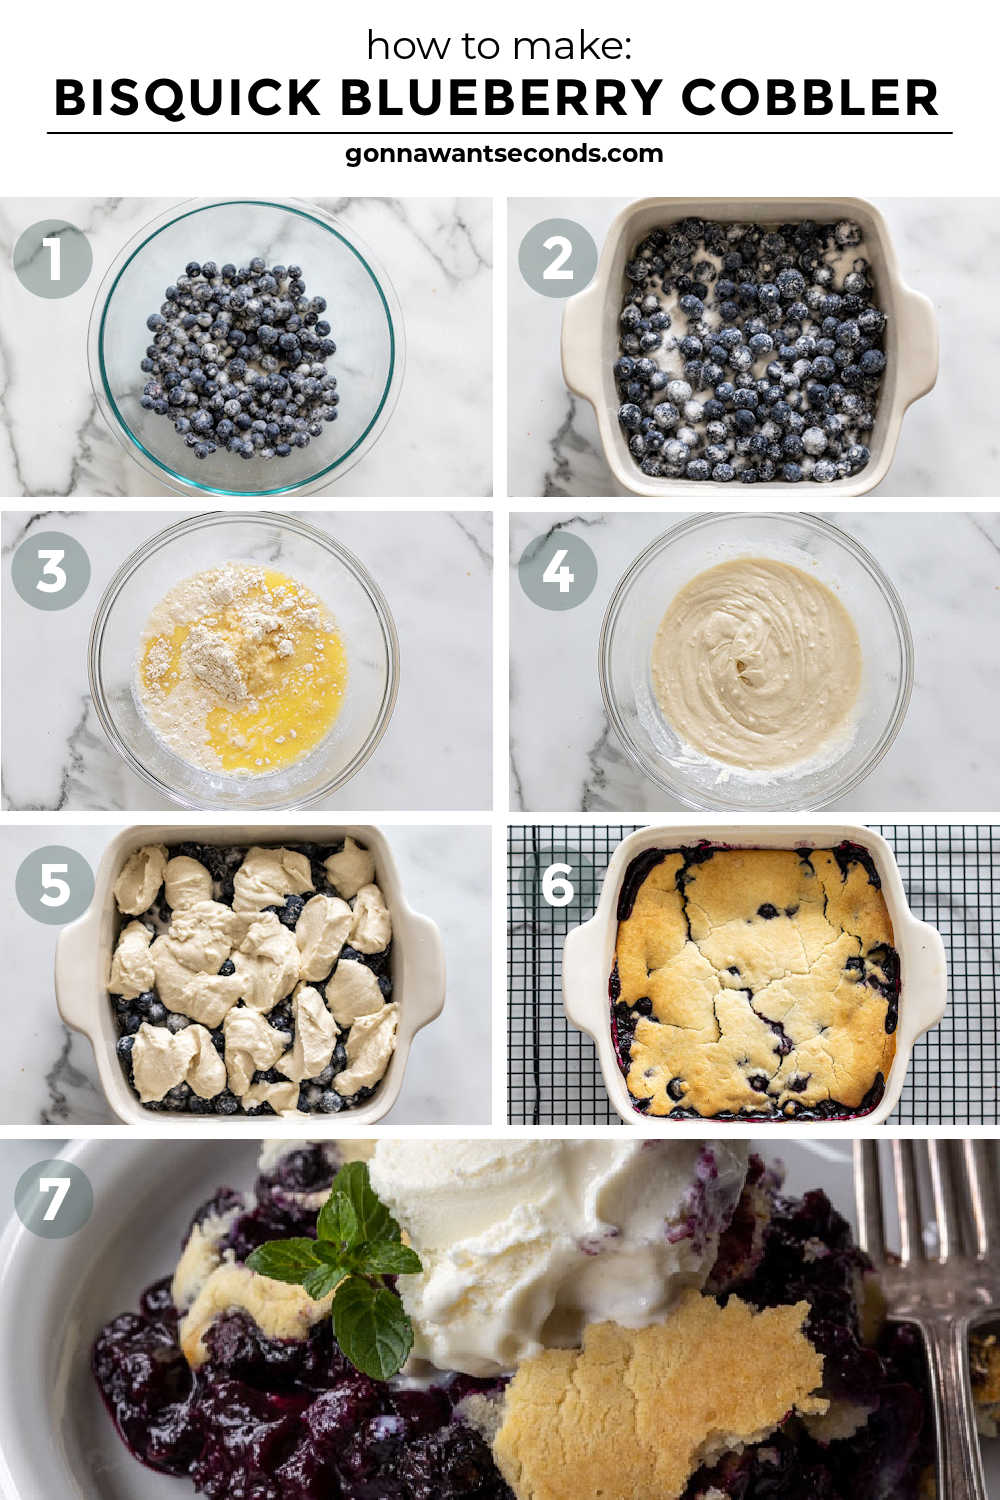 Step by step how to make bisquick blueberry cobbler